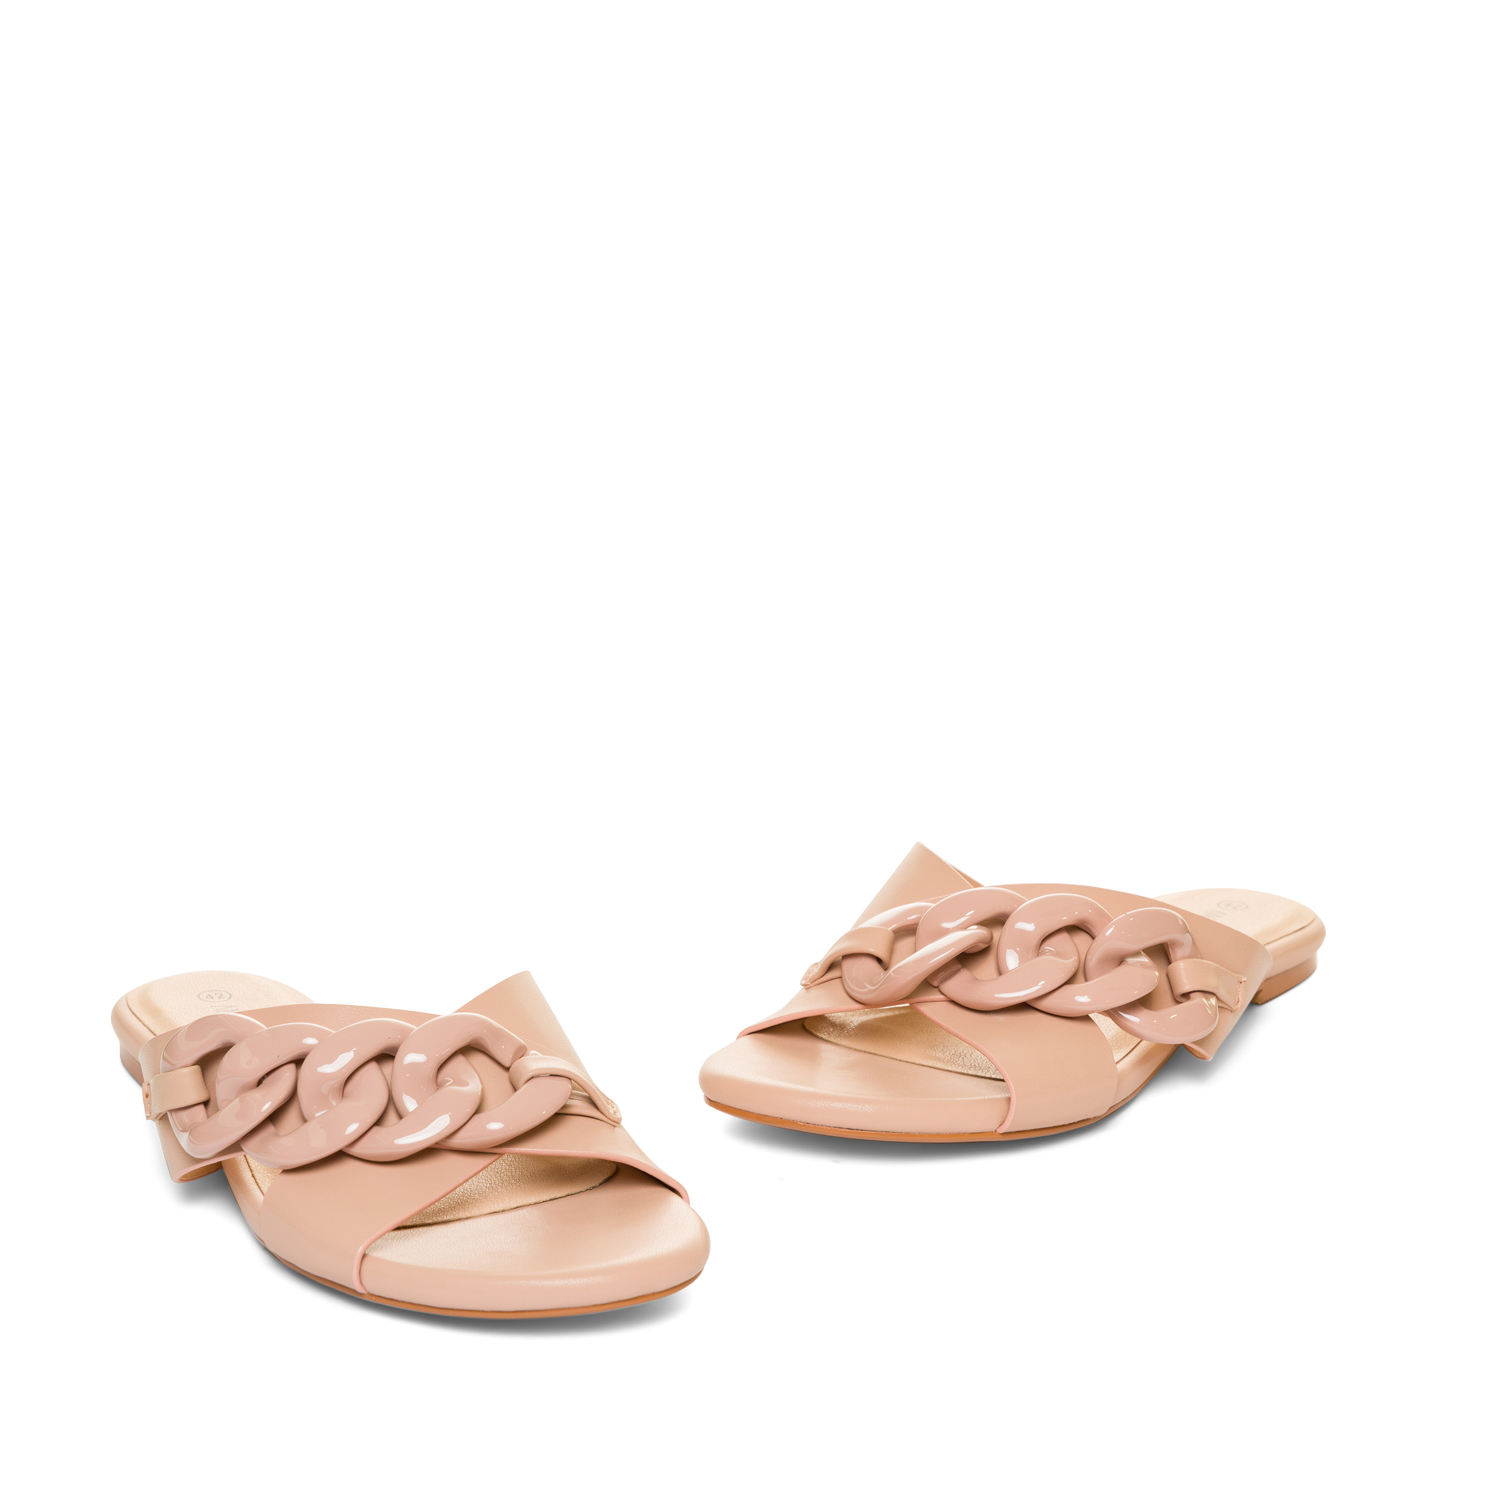 Nude faux leather flat sandals 